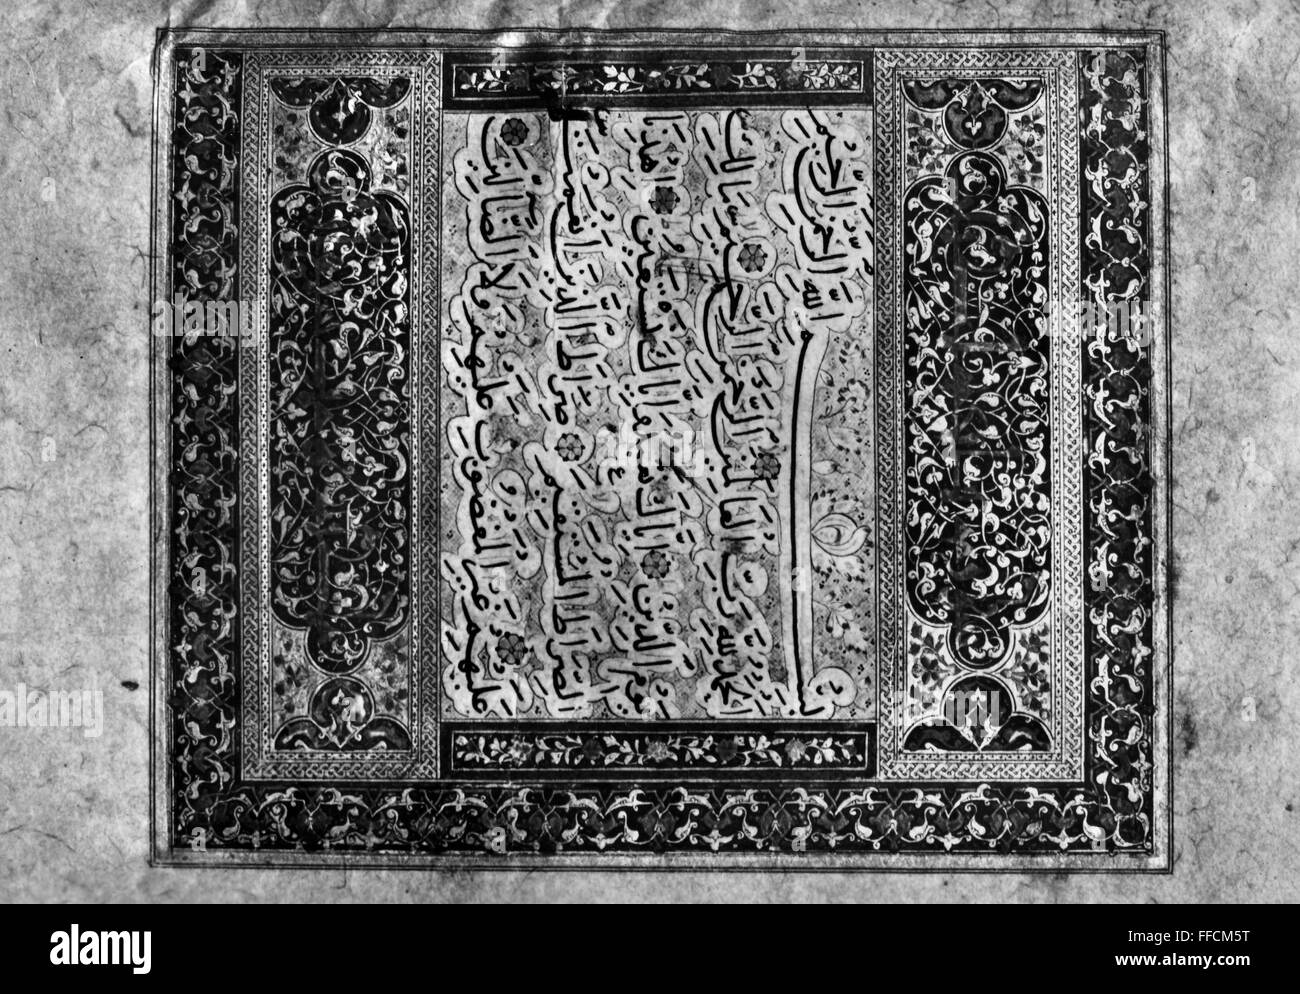 MEDIEVAL KORAN./nThe opening chapter from a 13th-14th century Koran. Stock Photo